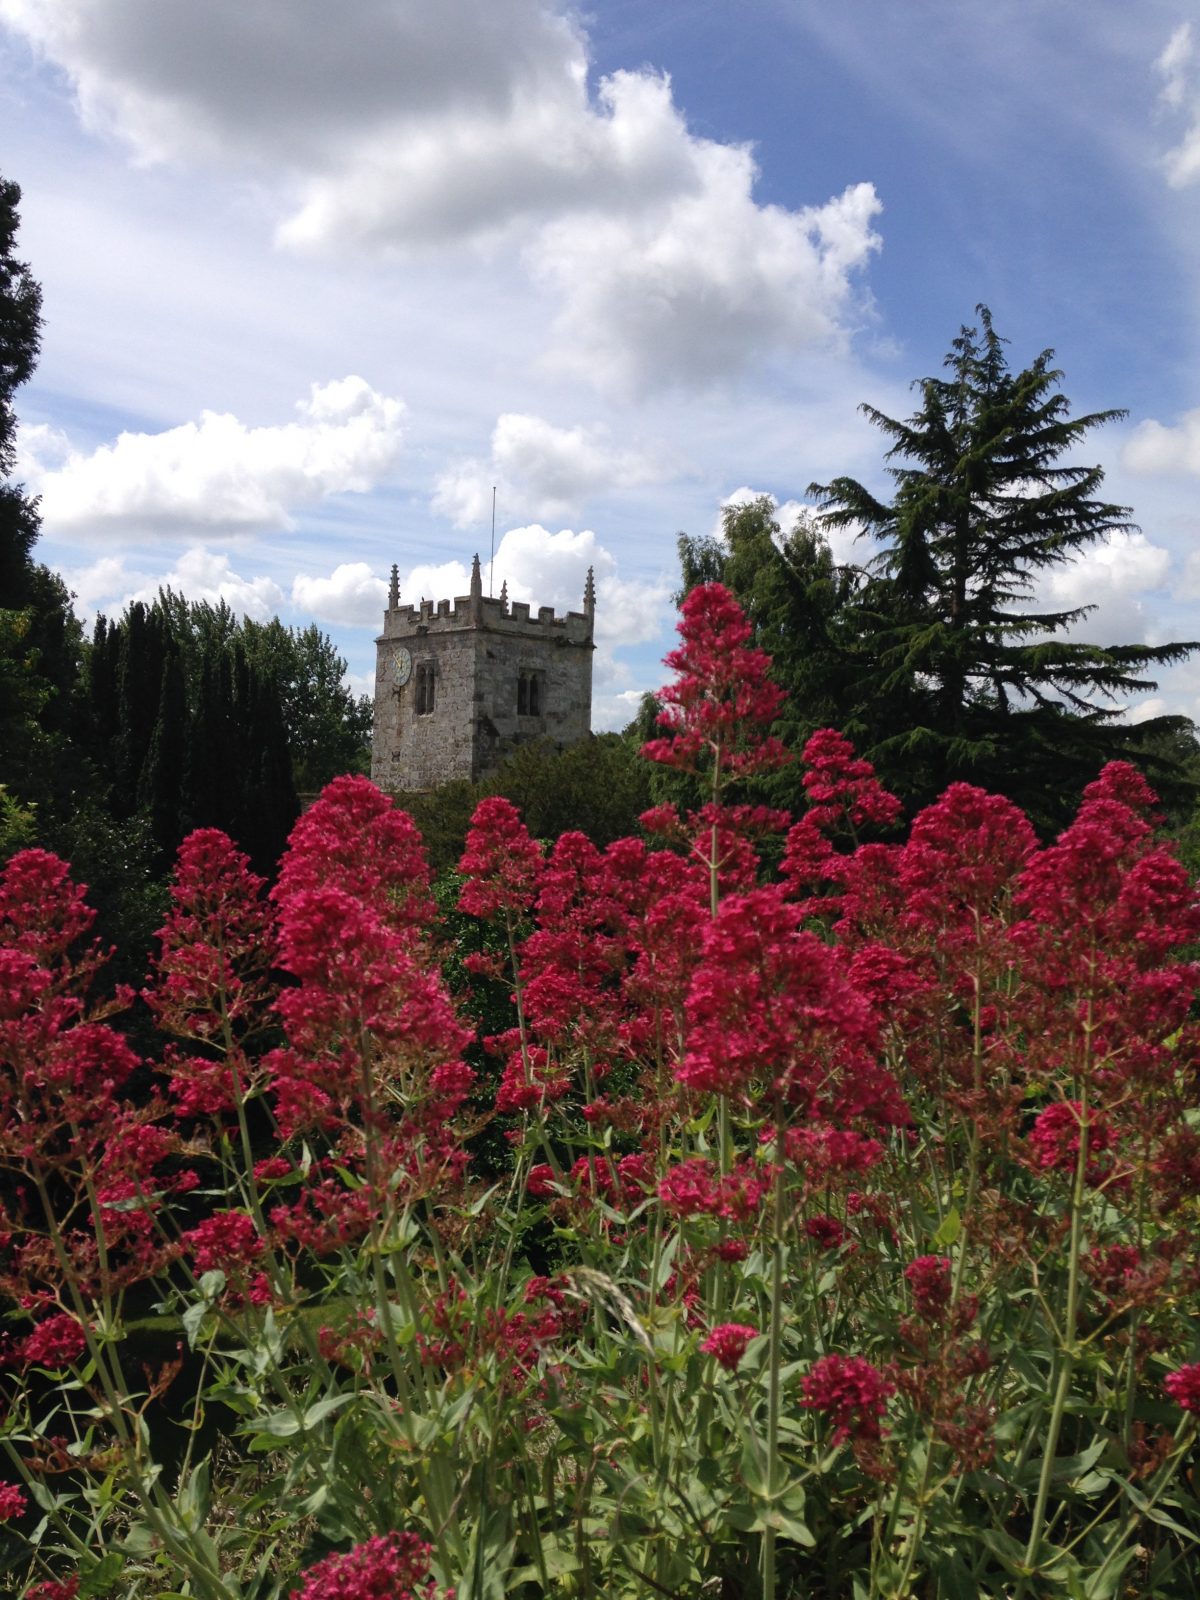 Wild valerian fronting East Knoyle church tower - Ted Haines